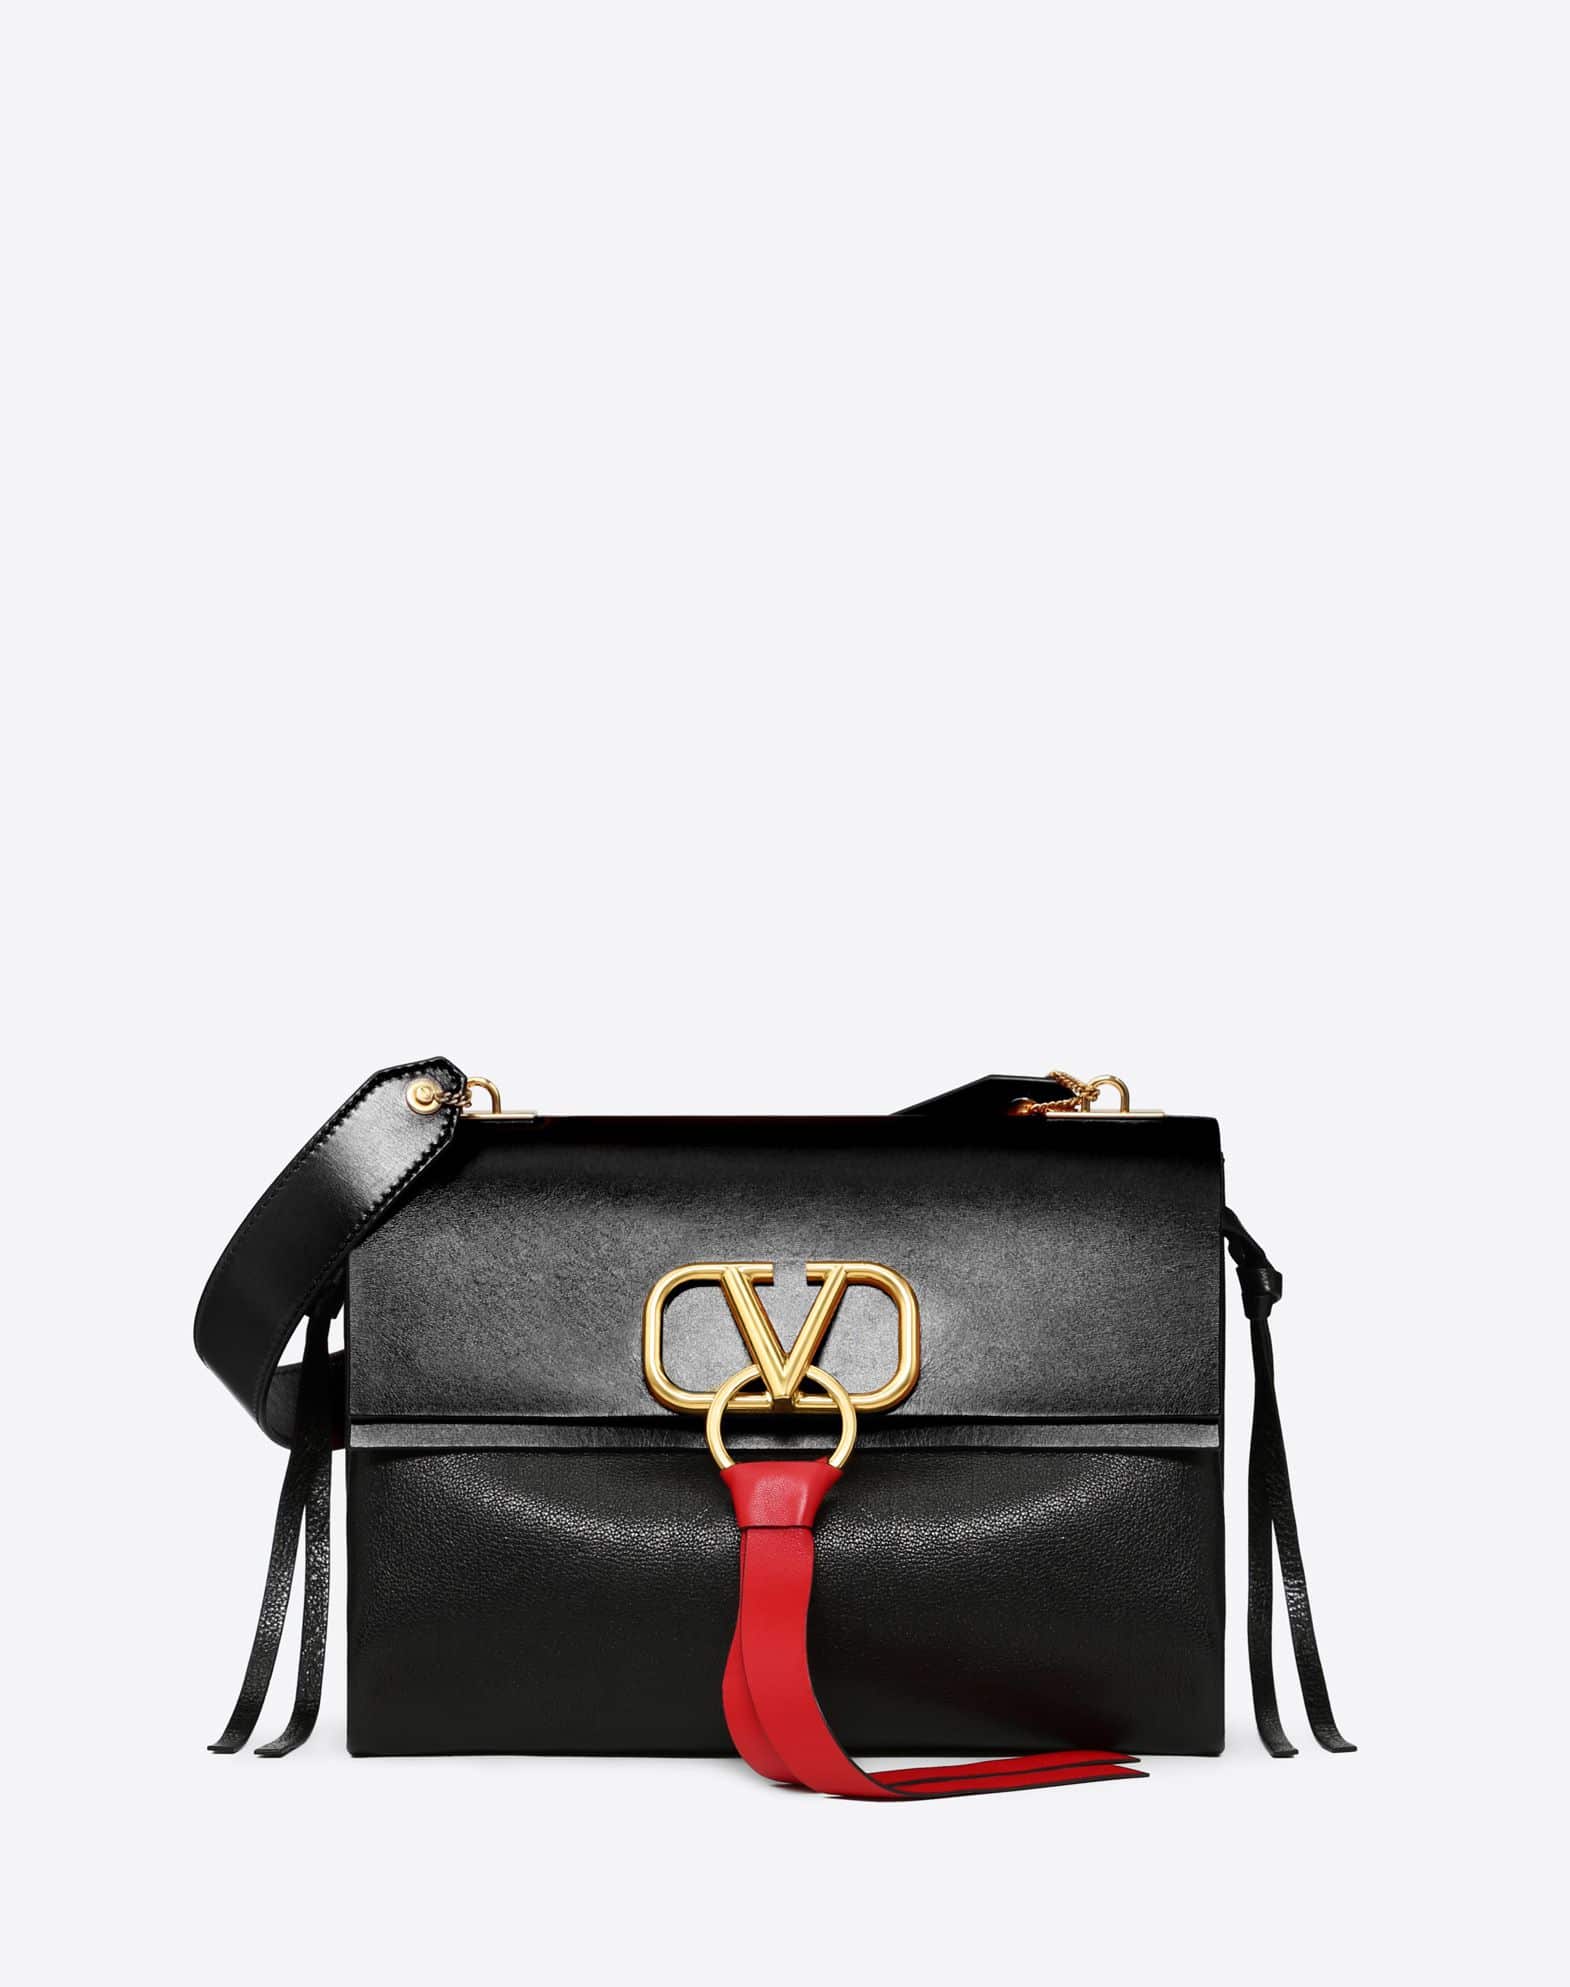 Valentino Bag Price List Reference Guide - Spotted Fashion